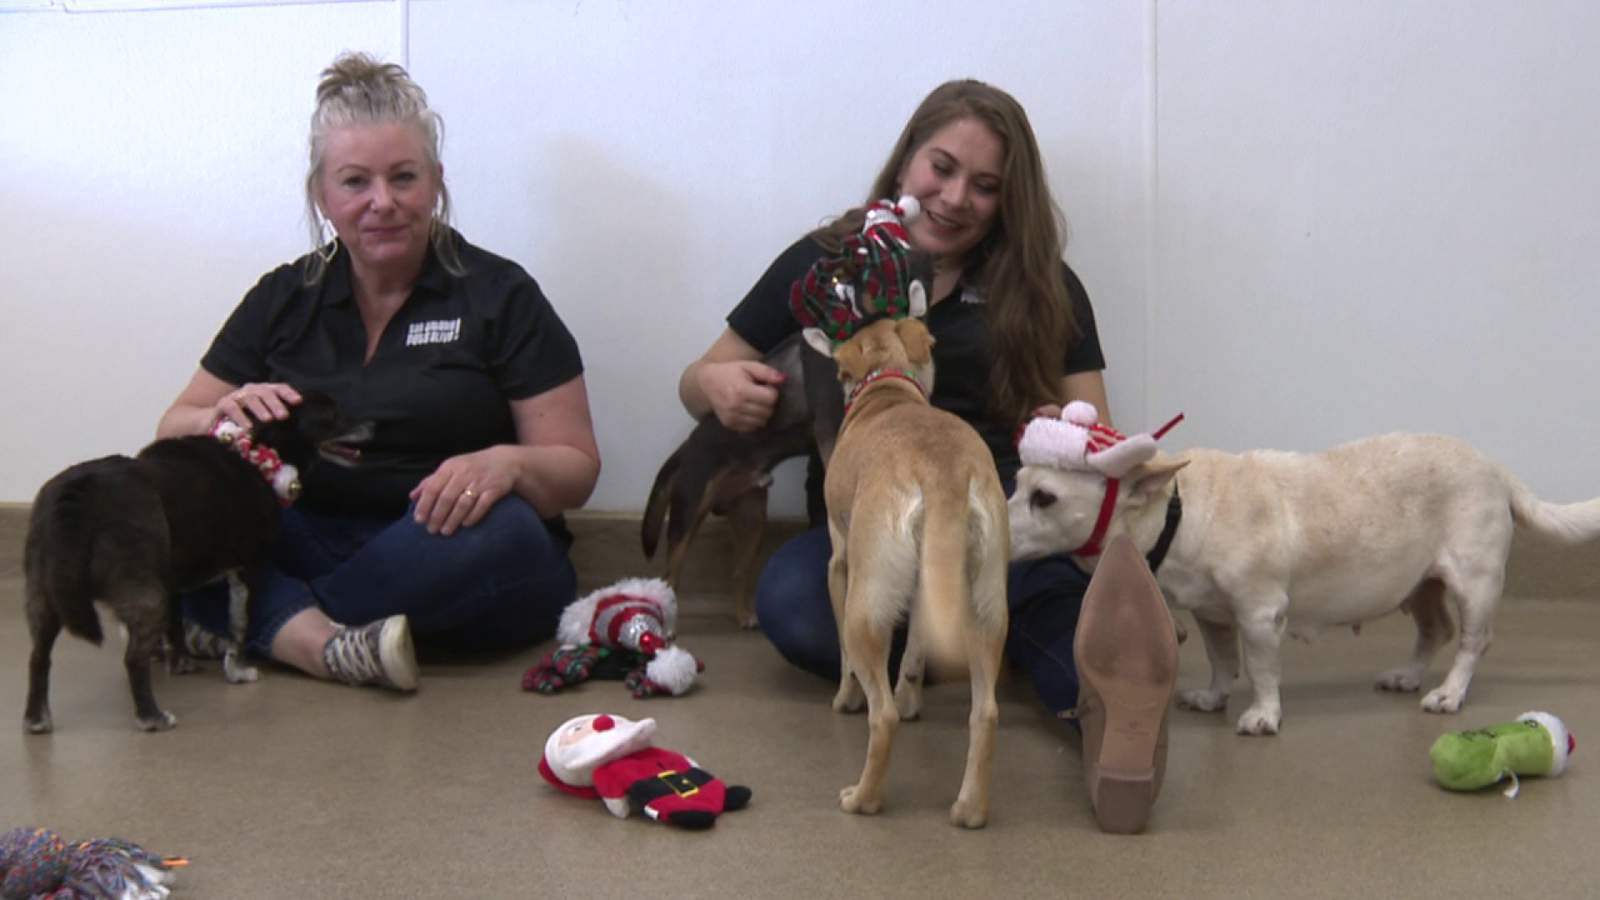 San Antonio Pets Alive strives to raise $10K in 24 hours